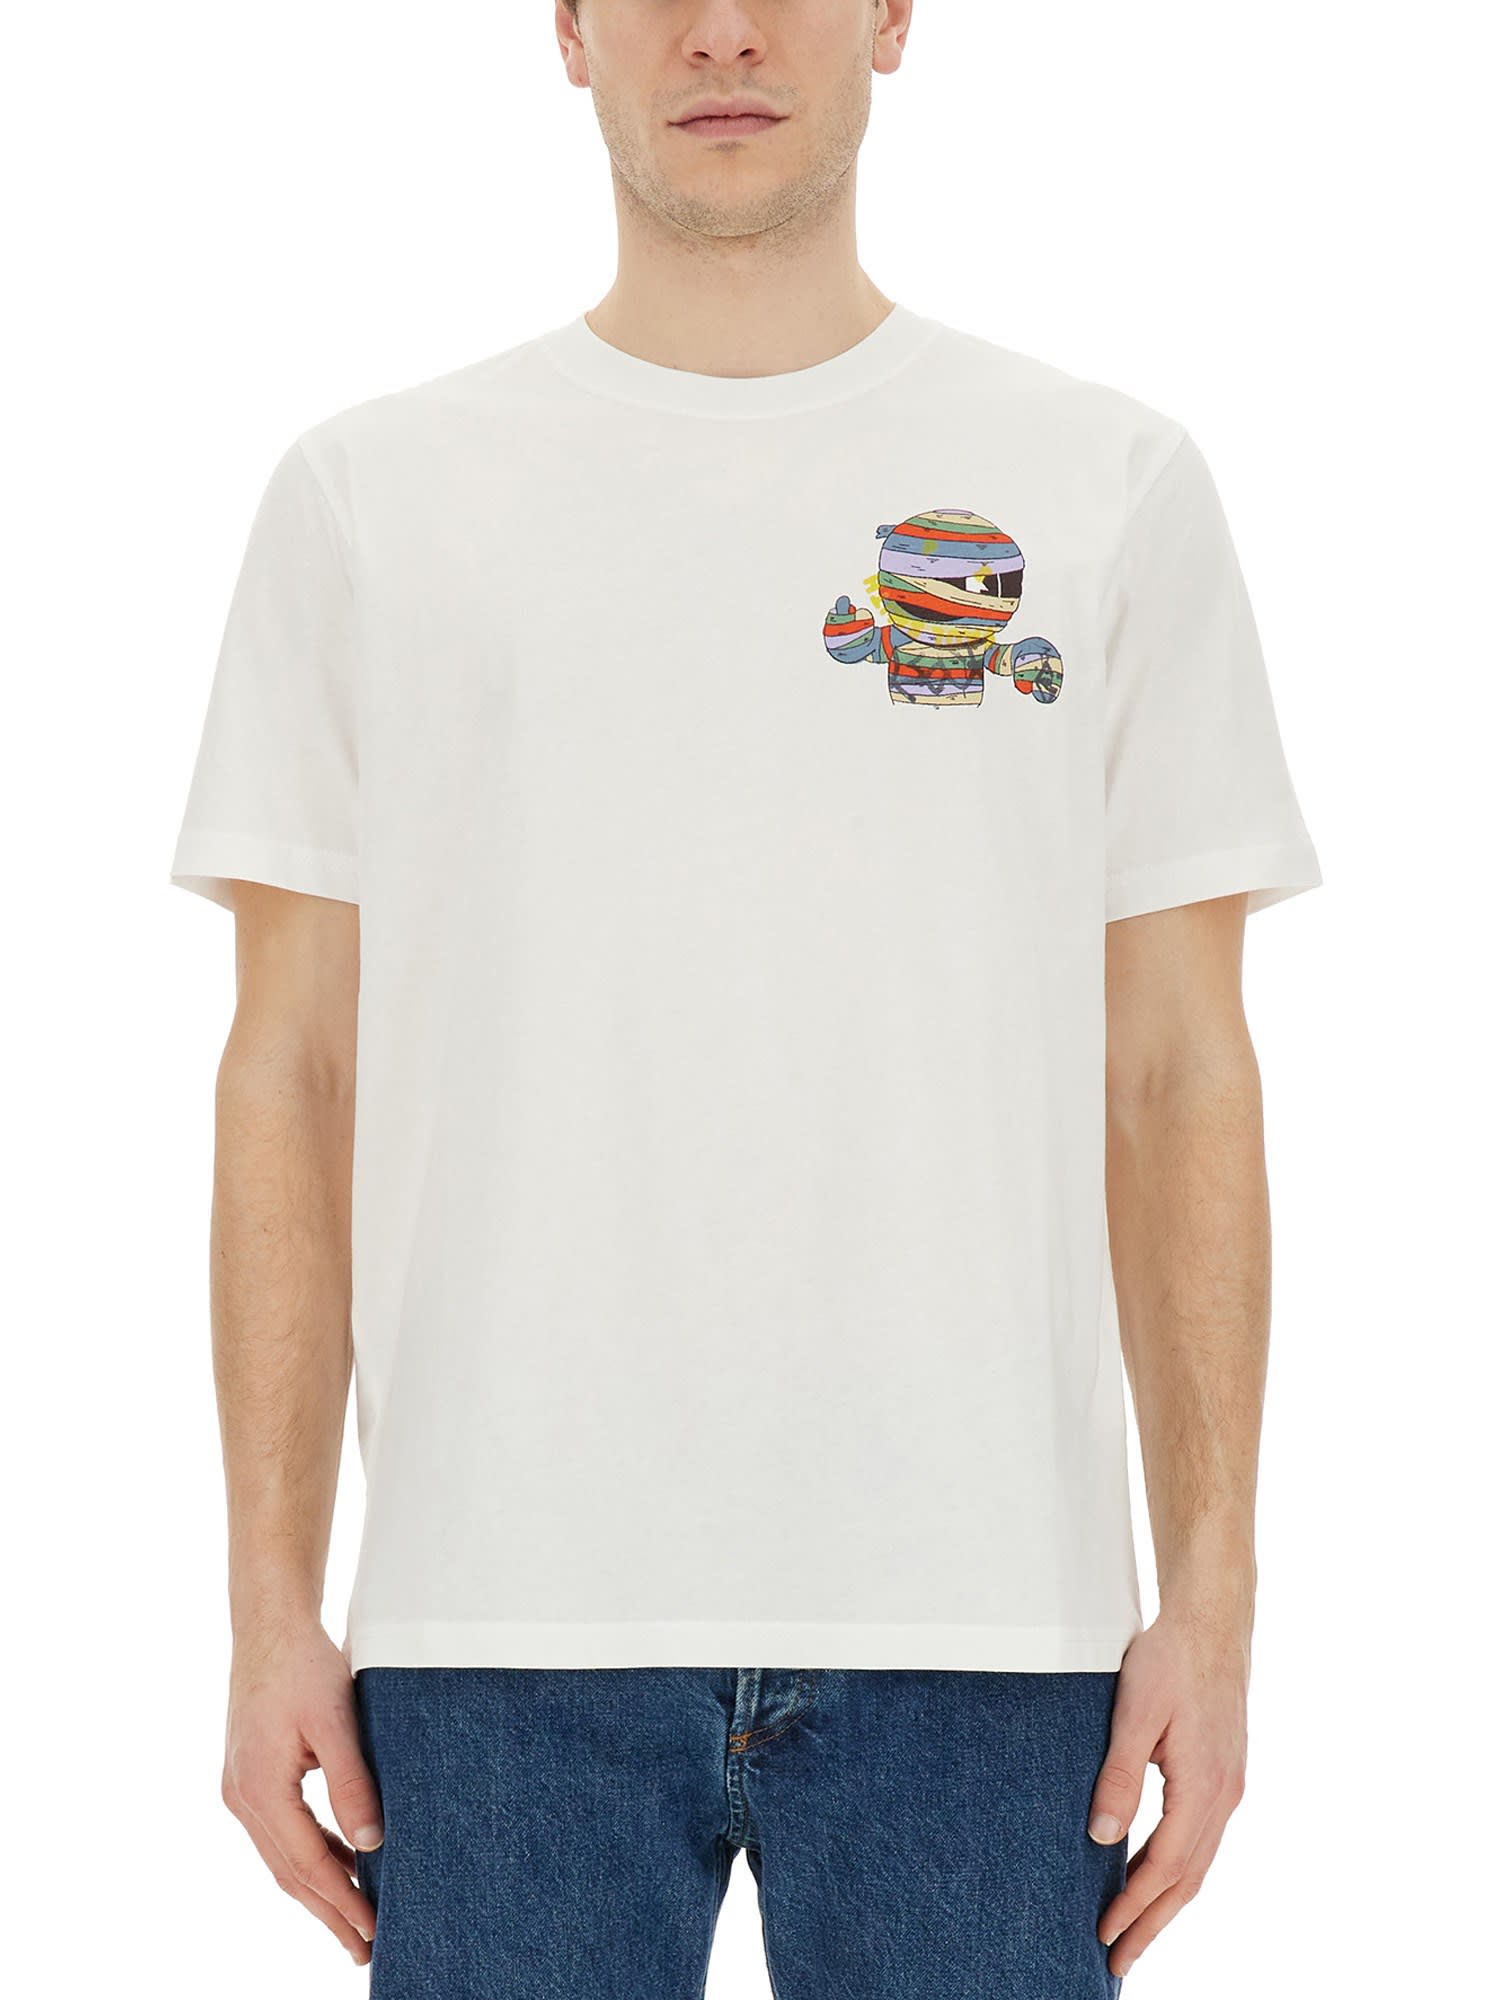 PS BY PAUL SMITH REGULAR FIT T-SHIRT